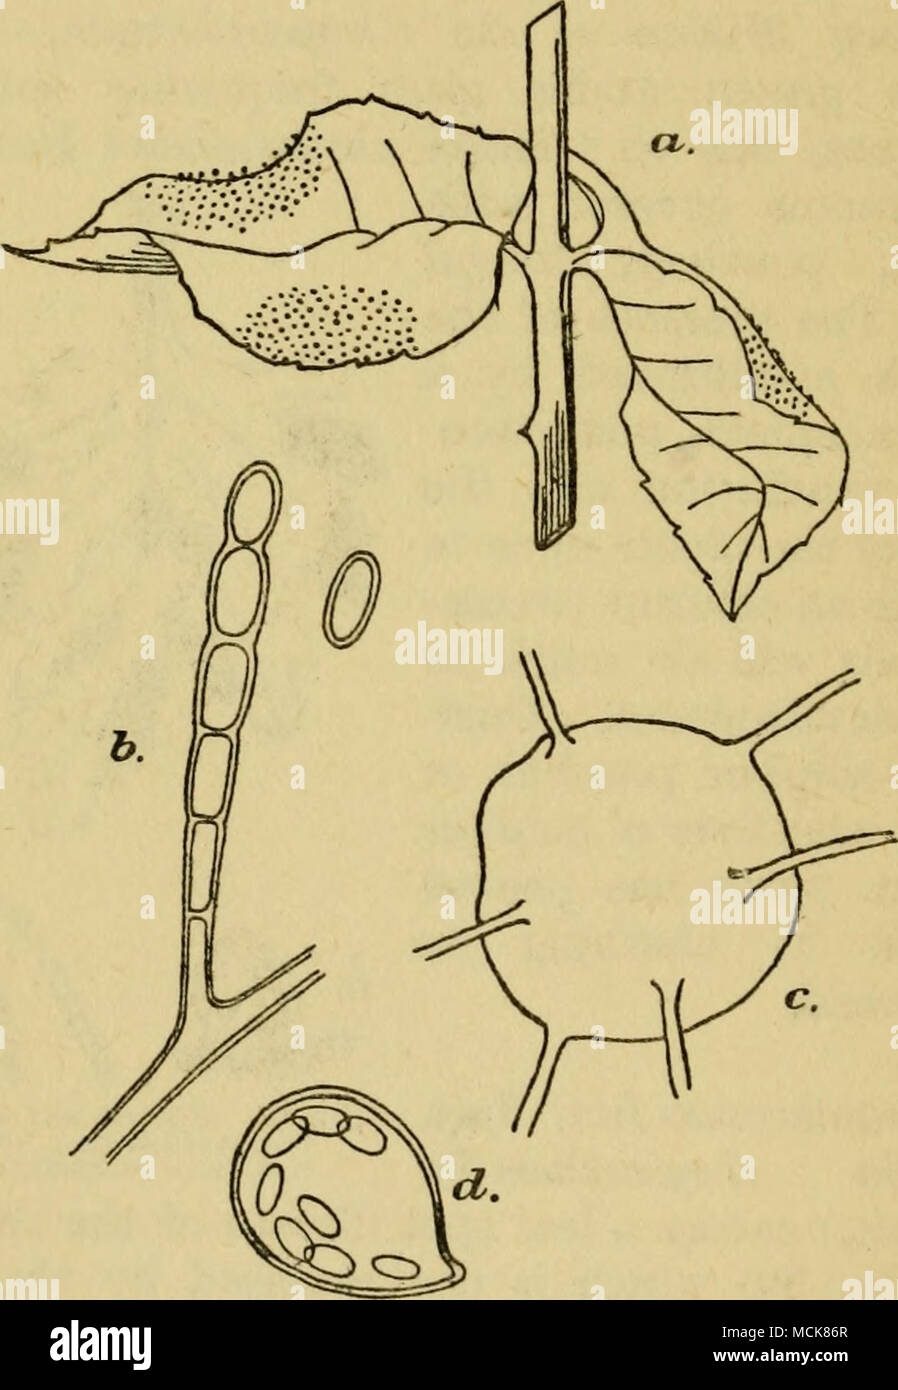 . Fig. 31. Powdery mildew of the rose : («) Diseased leaves, (6) summer spores, (c) a perithecium, (d) ascus containing eight ascosporcs. of attackmg all leaves and young shoots. The first symptom of the disease is the sudden flagging of young, vigorous leaves, which readily fall off the stem if it is shaken gently. The shoot itseK droops and dies. Diseased leaves and shoots possess reddish-purple patches bearing a fungus growth. Gradually the disease develops until all the green tissues are destroyed. Stock Photo